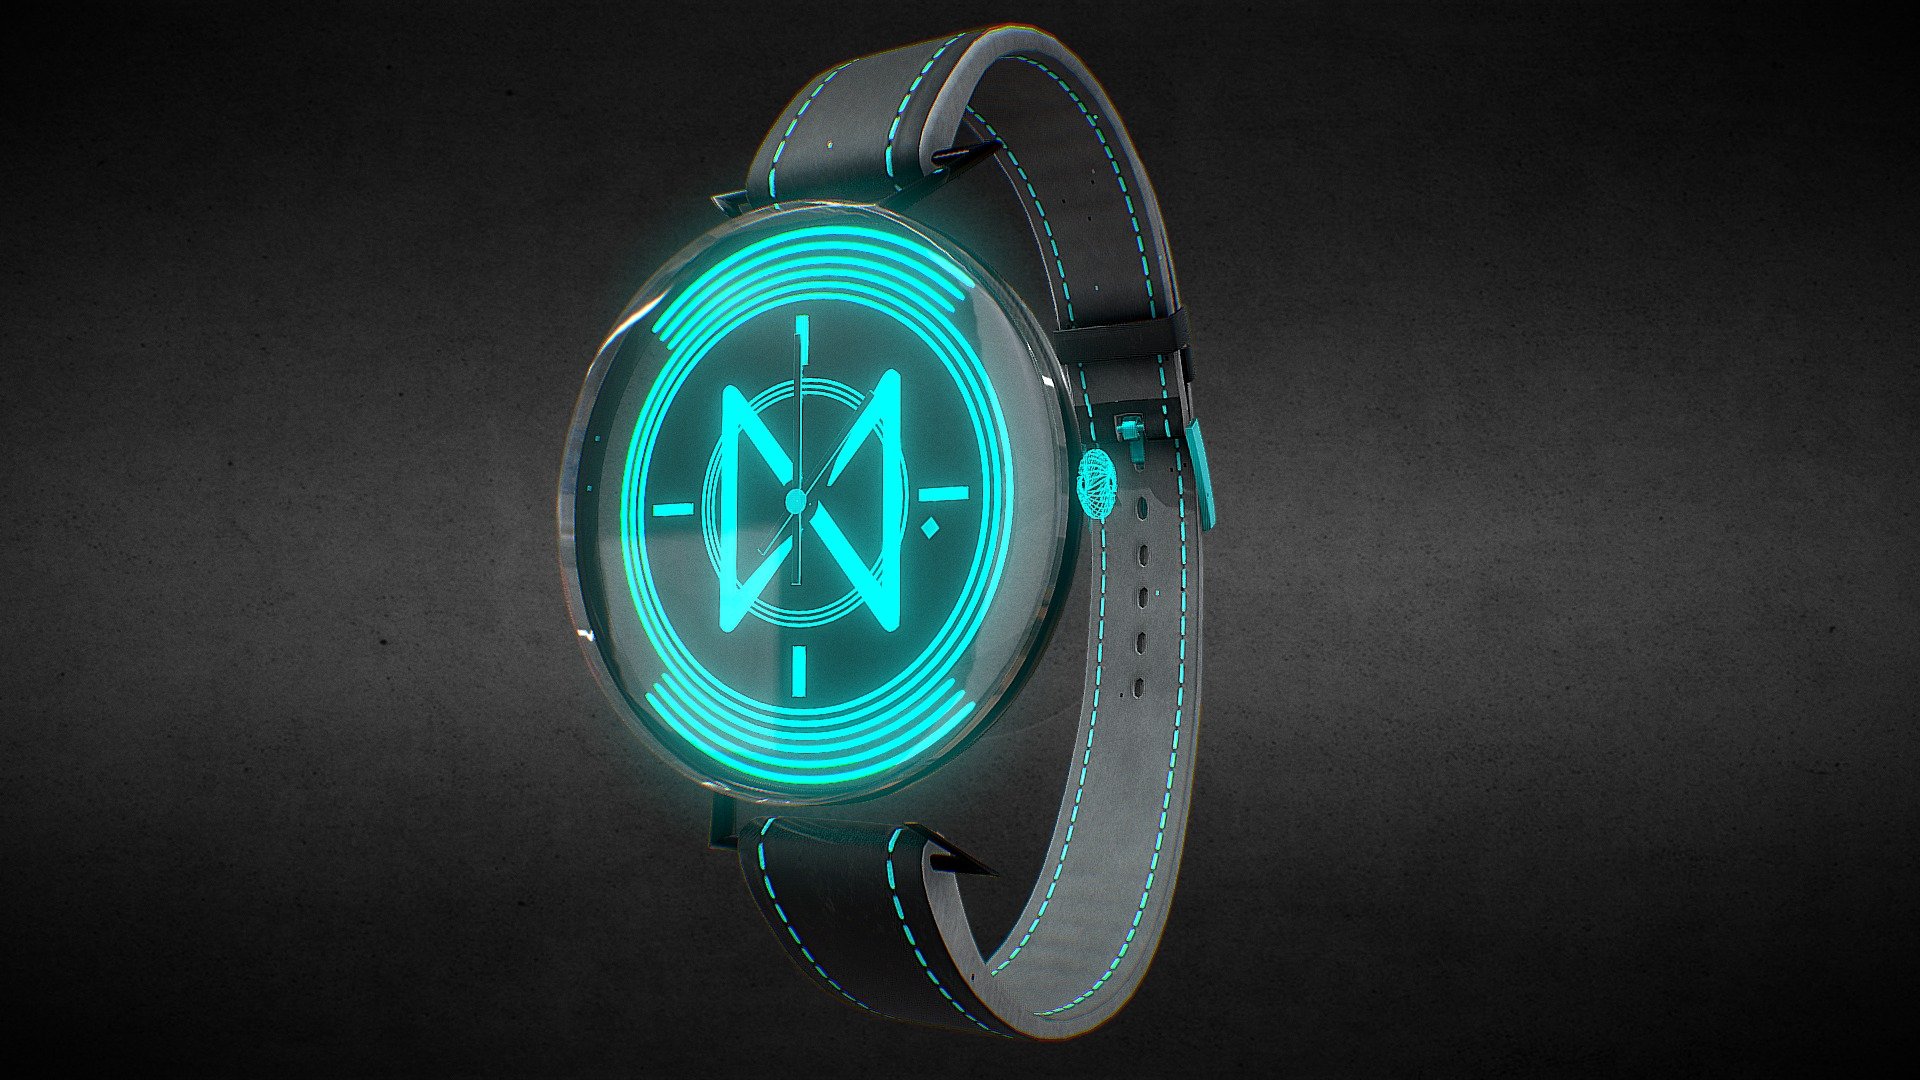 Awesome stainless steel NEAR Protocol coin Watch.

Currently available for download in FBX format.

3D model developed by AR-Watches 3d model